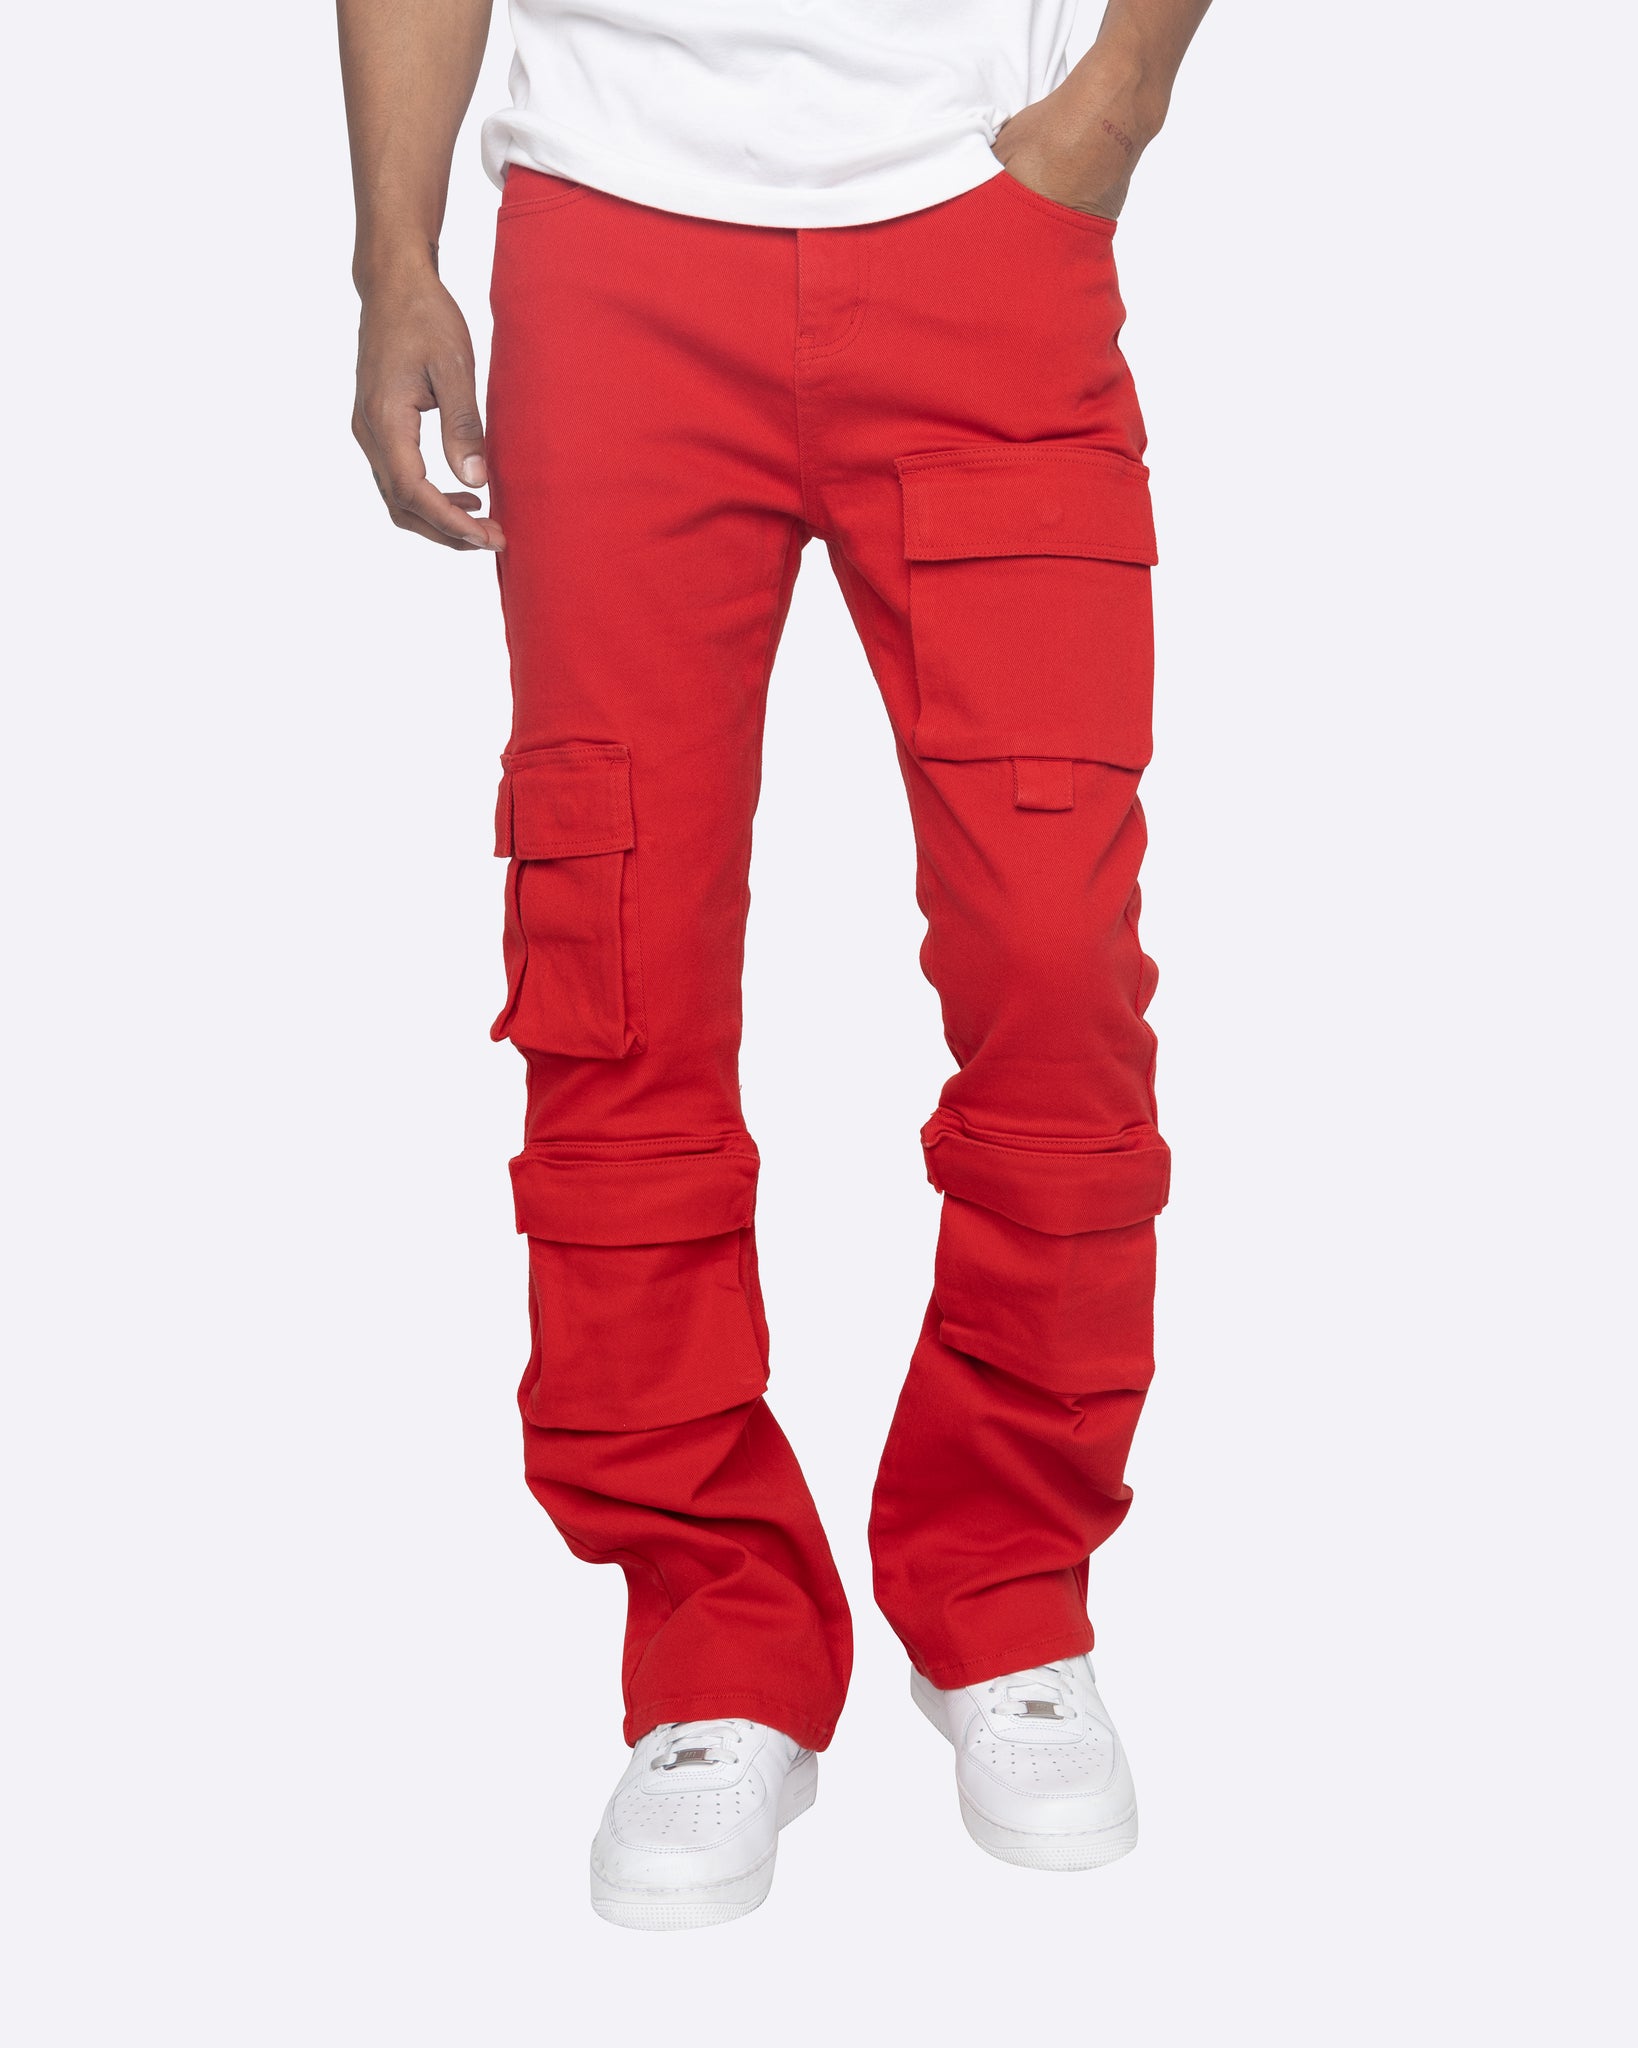 Buy Maoning Mens Slim Fit Urban Trousers Casual Pencil Jogger Cargo Pants  with Big Pockets Red L at Amazonin